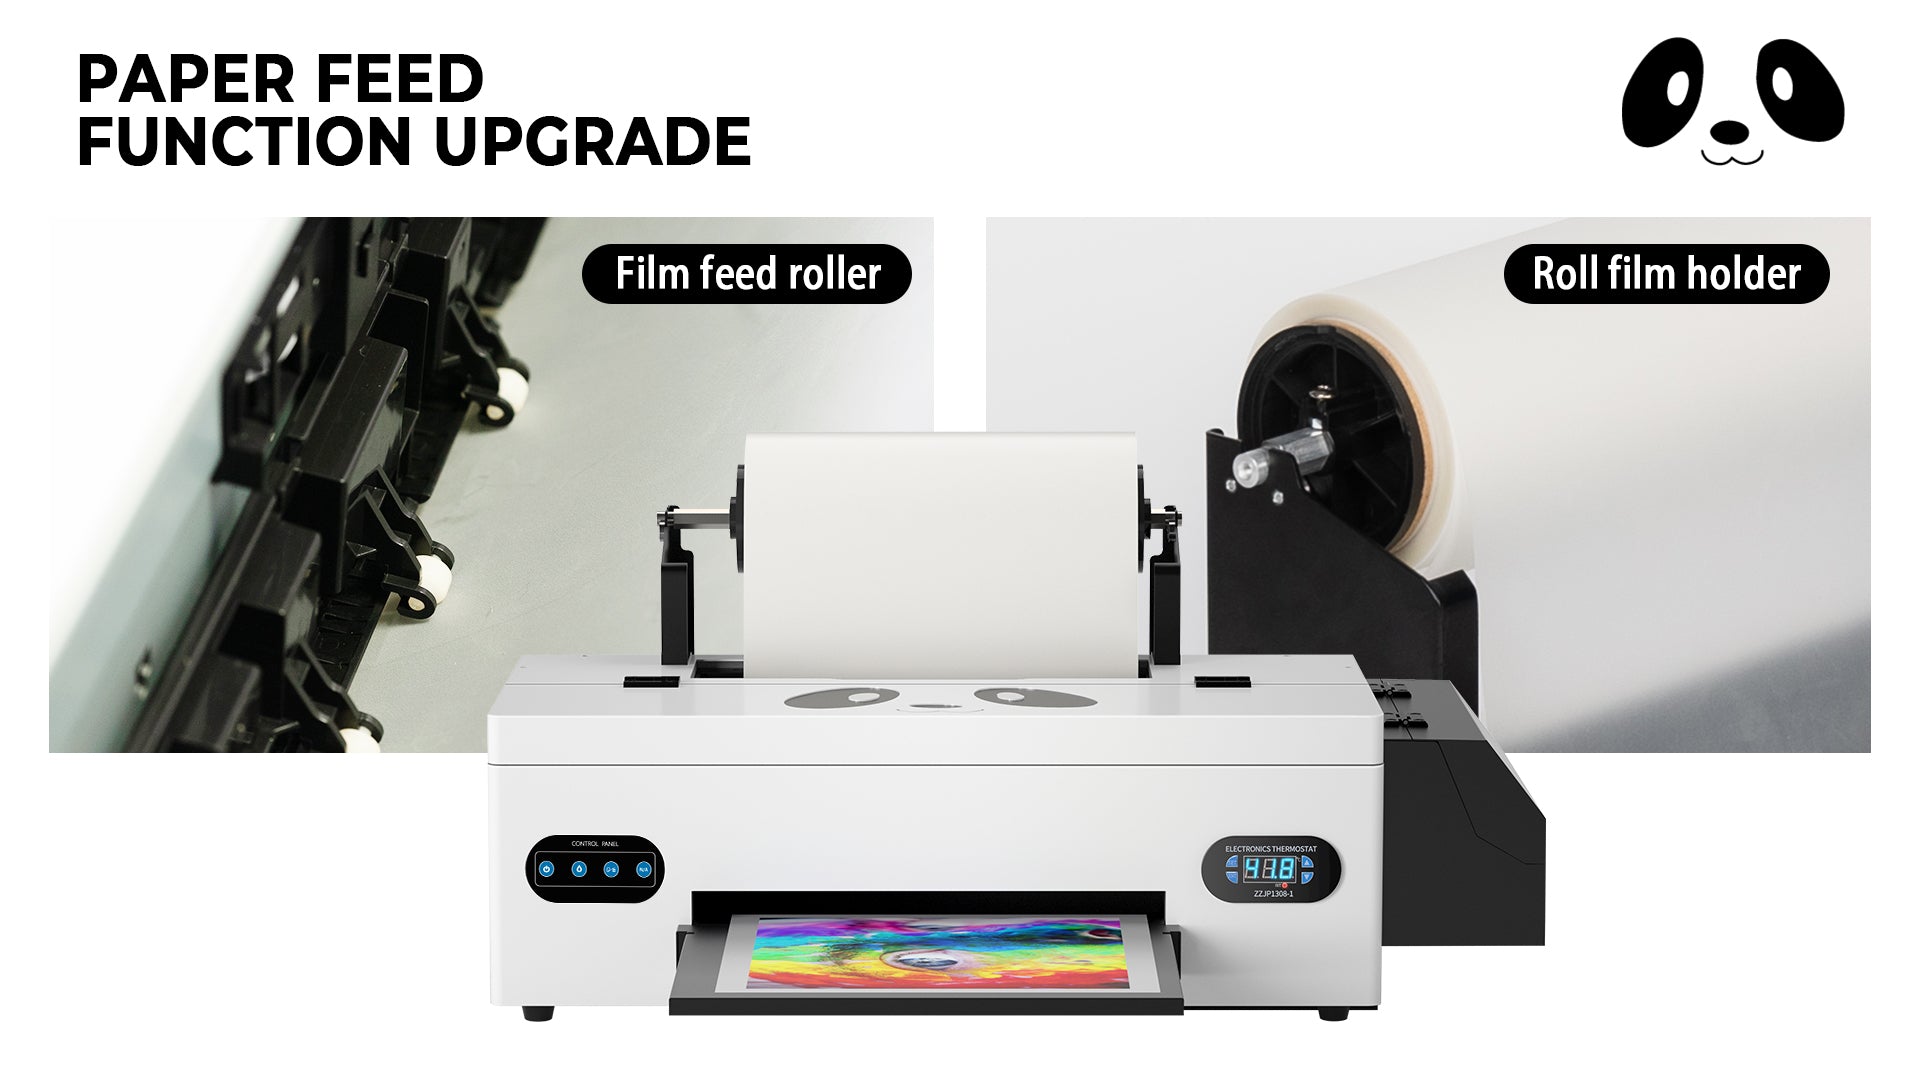 Jetvinner DTF Printer A3 Machine for Epson R1390 Tshirt Printer With PET  Film Oven 100pcs A3 DTF Printer Powder For Textile